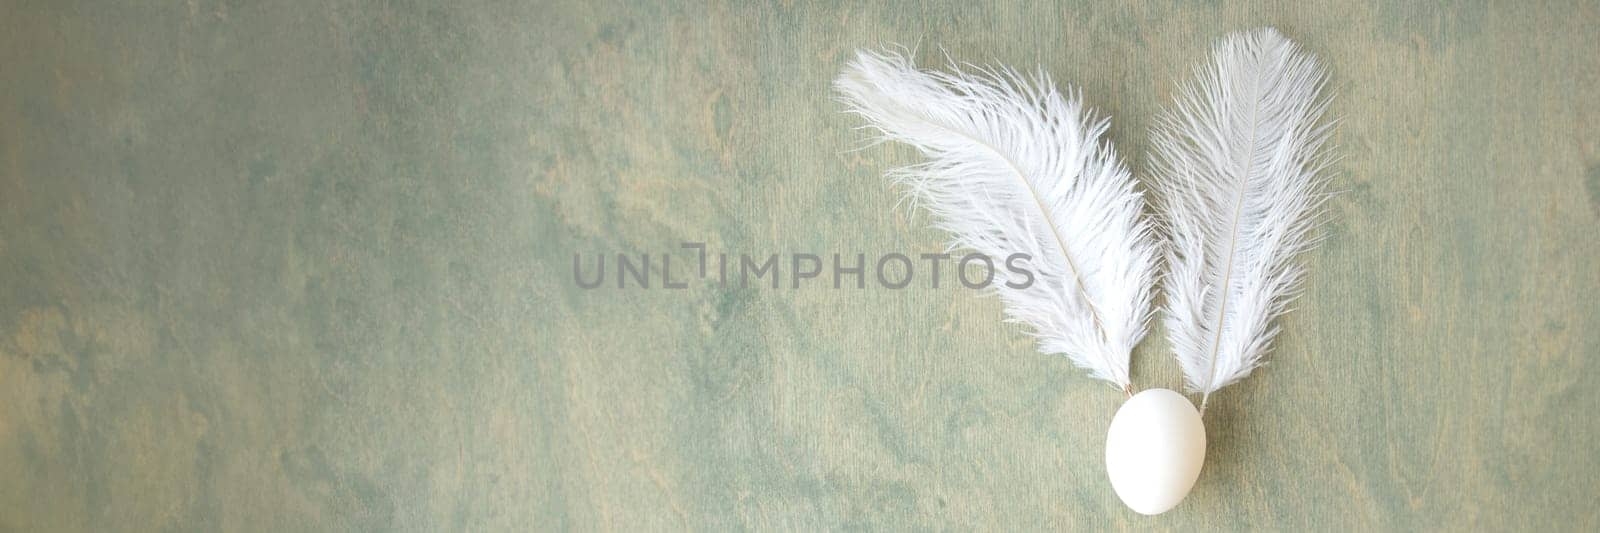 banner of Easter background, egg and white feathers in form of hare on green wooden background by Leoschka